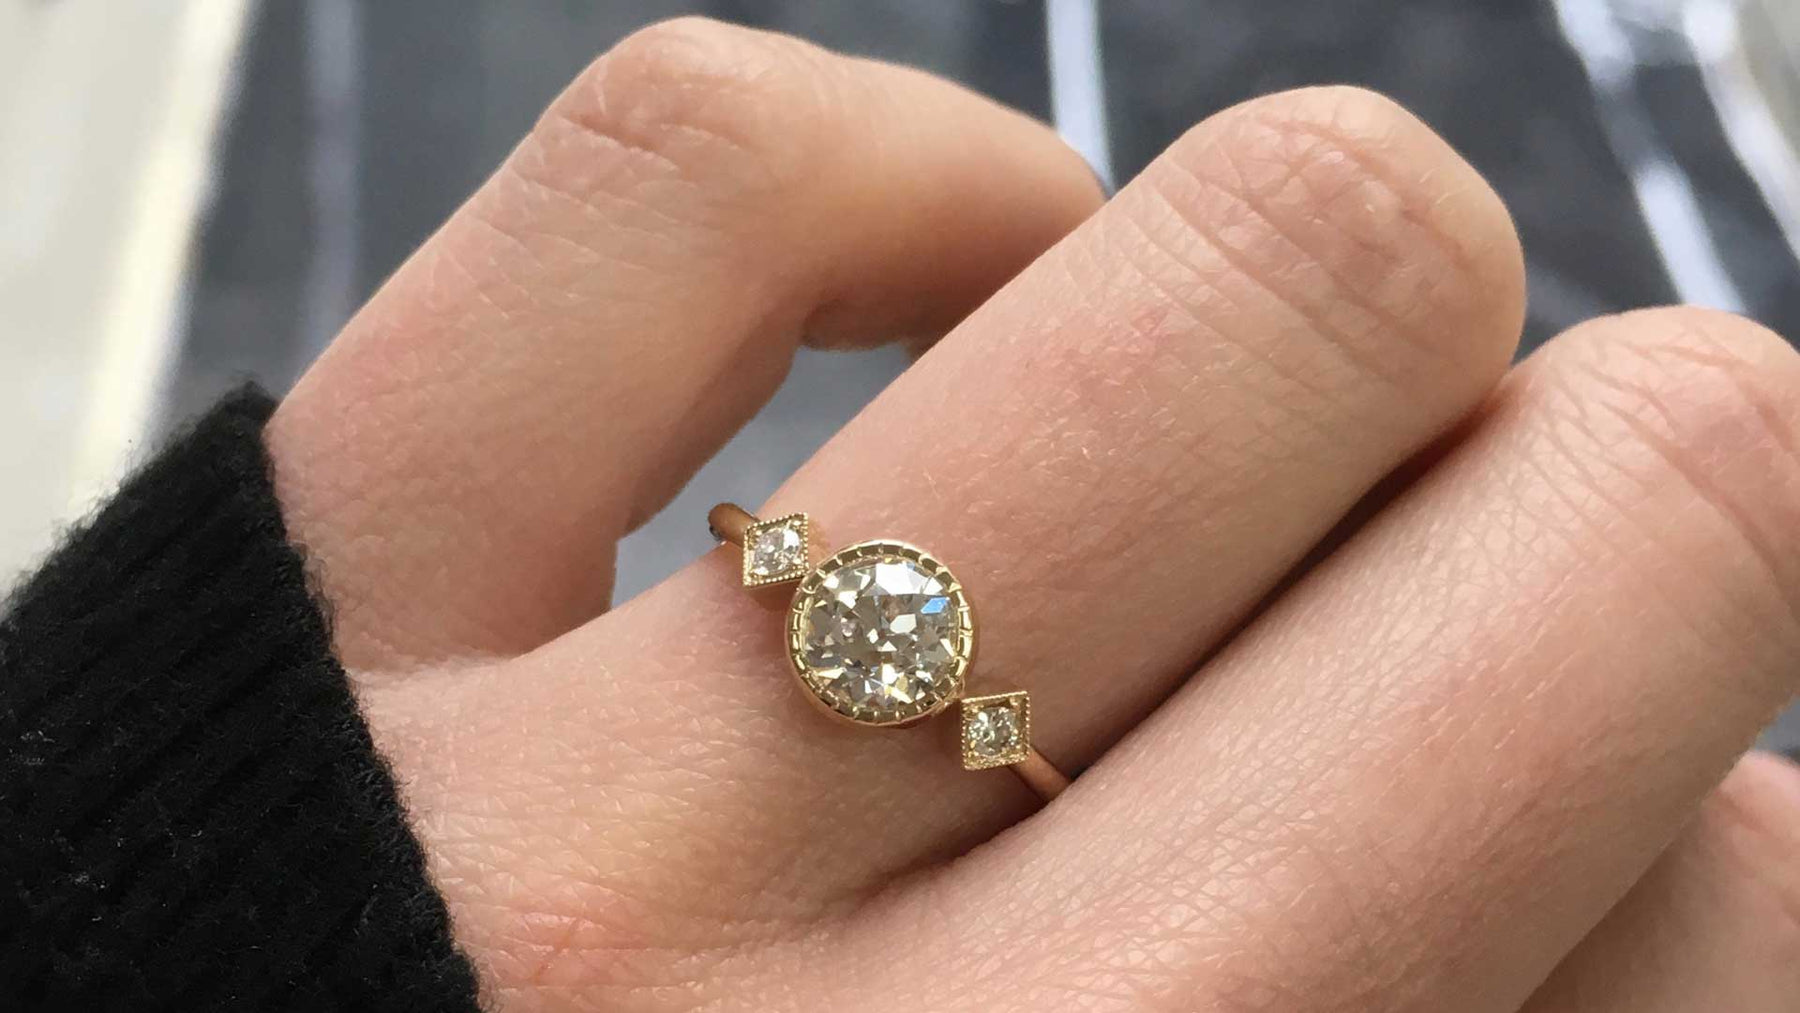 14k yellow gold custom engagement ring with white diamond center stone and two side white diamonds and milgrain detail on hand